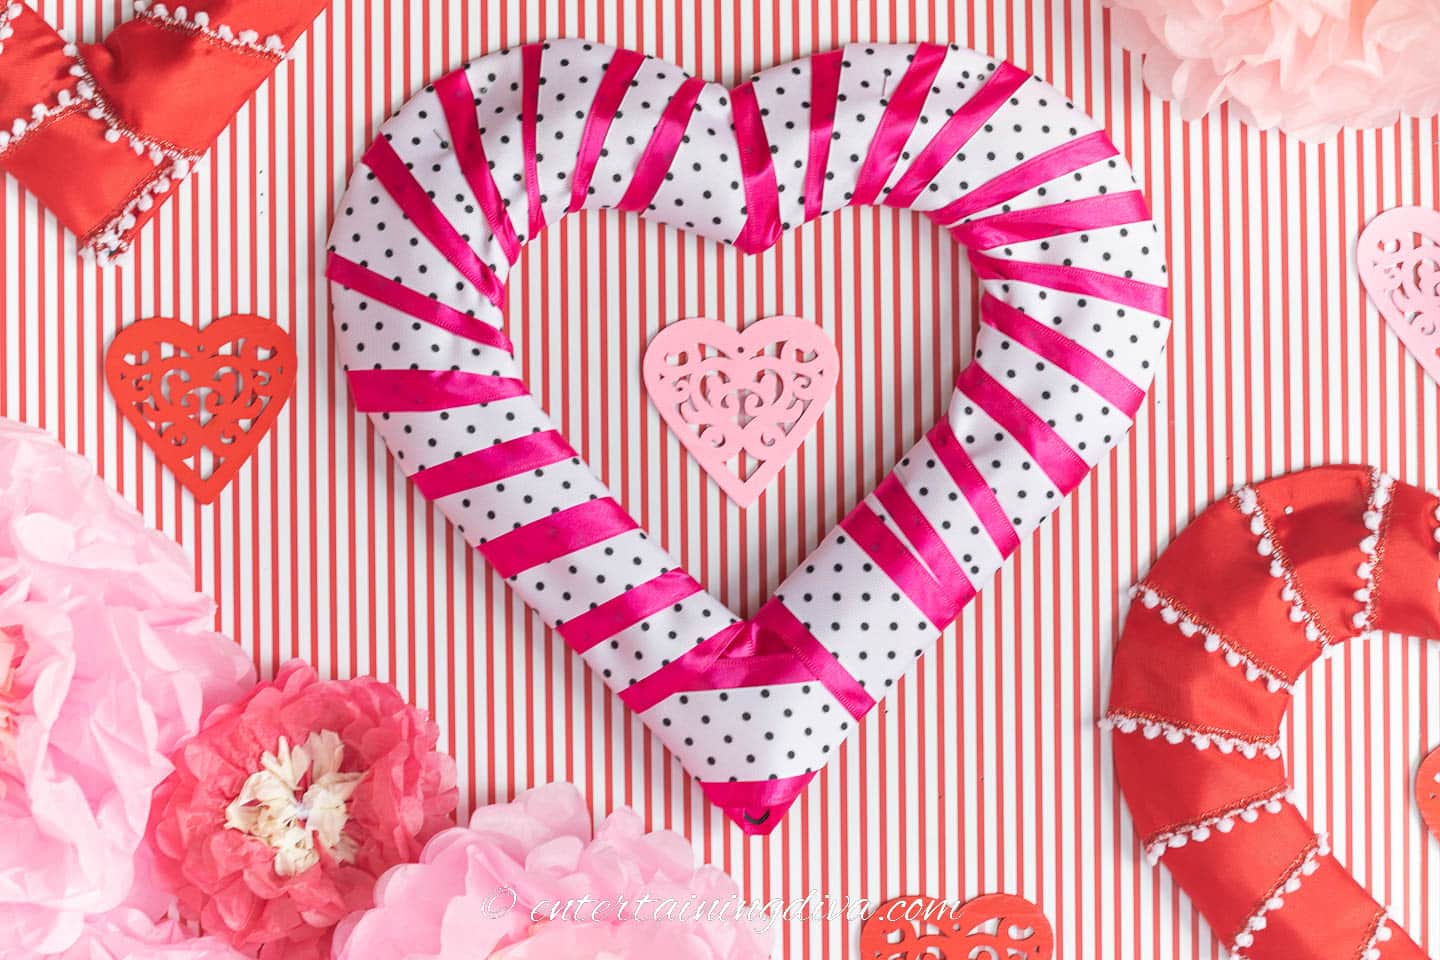 DIY pink, white and black heart wreath on a wall with red and white stripes